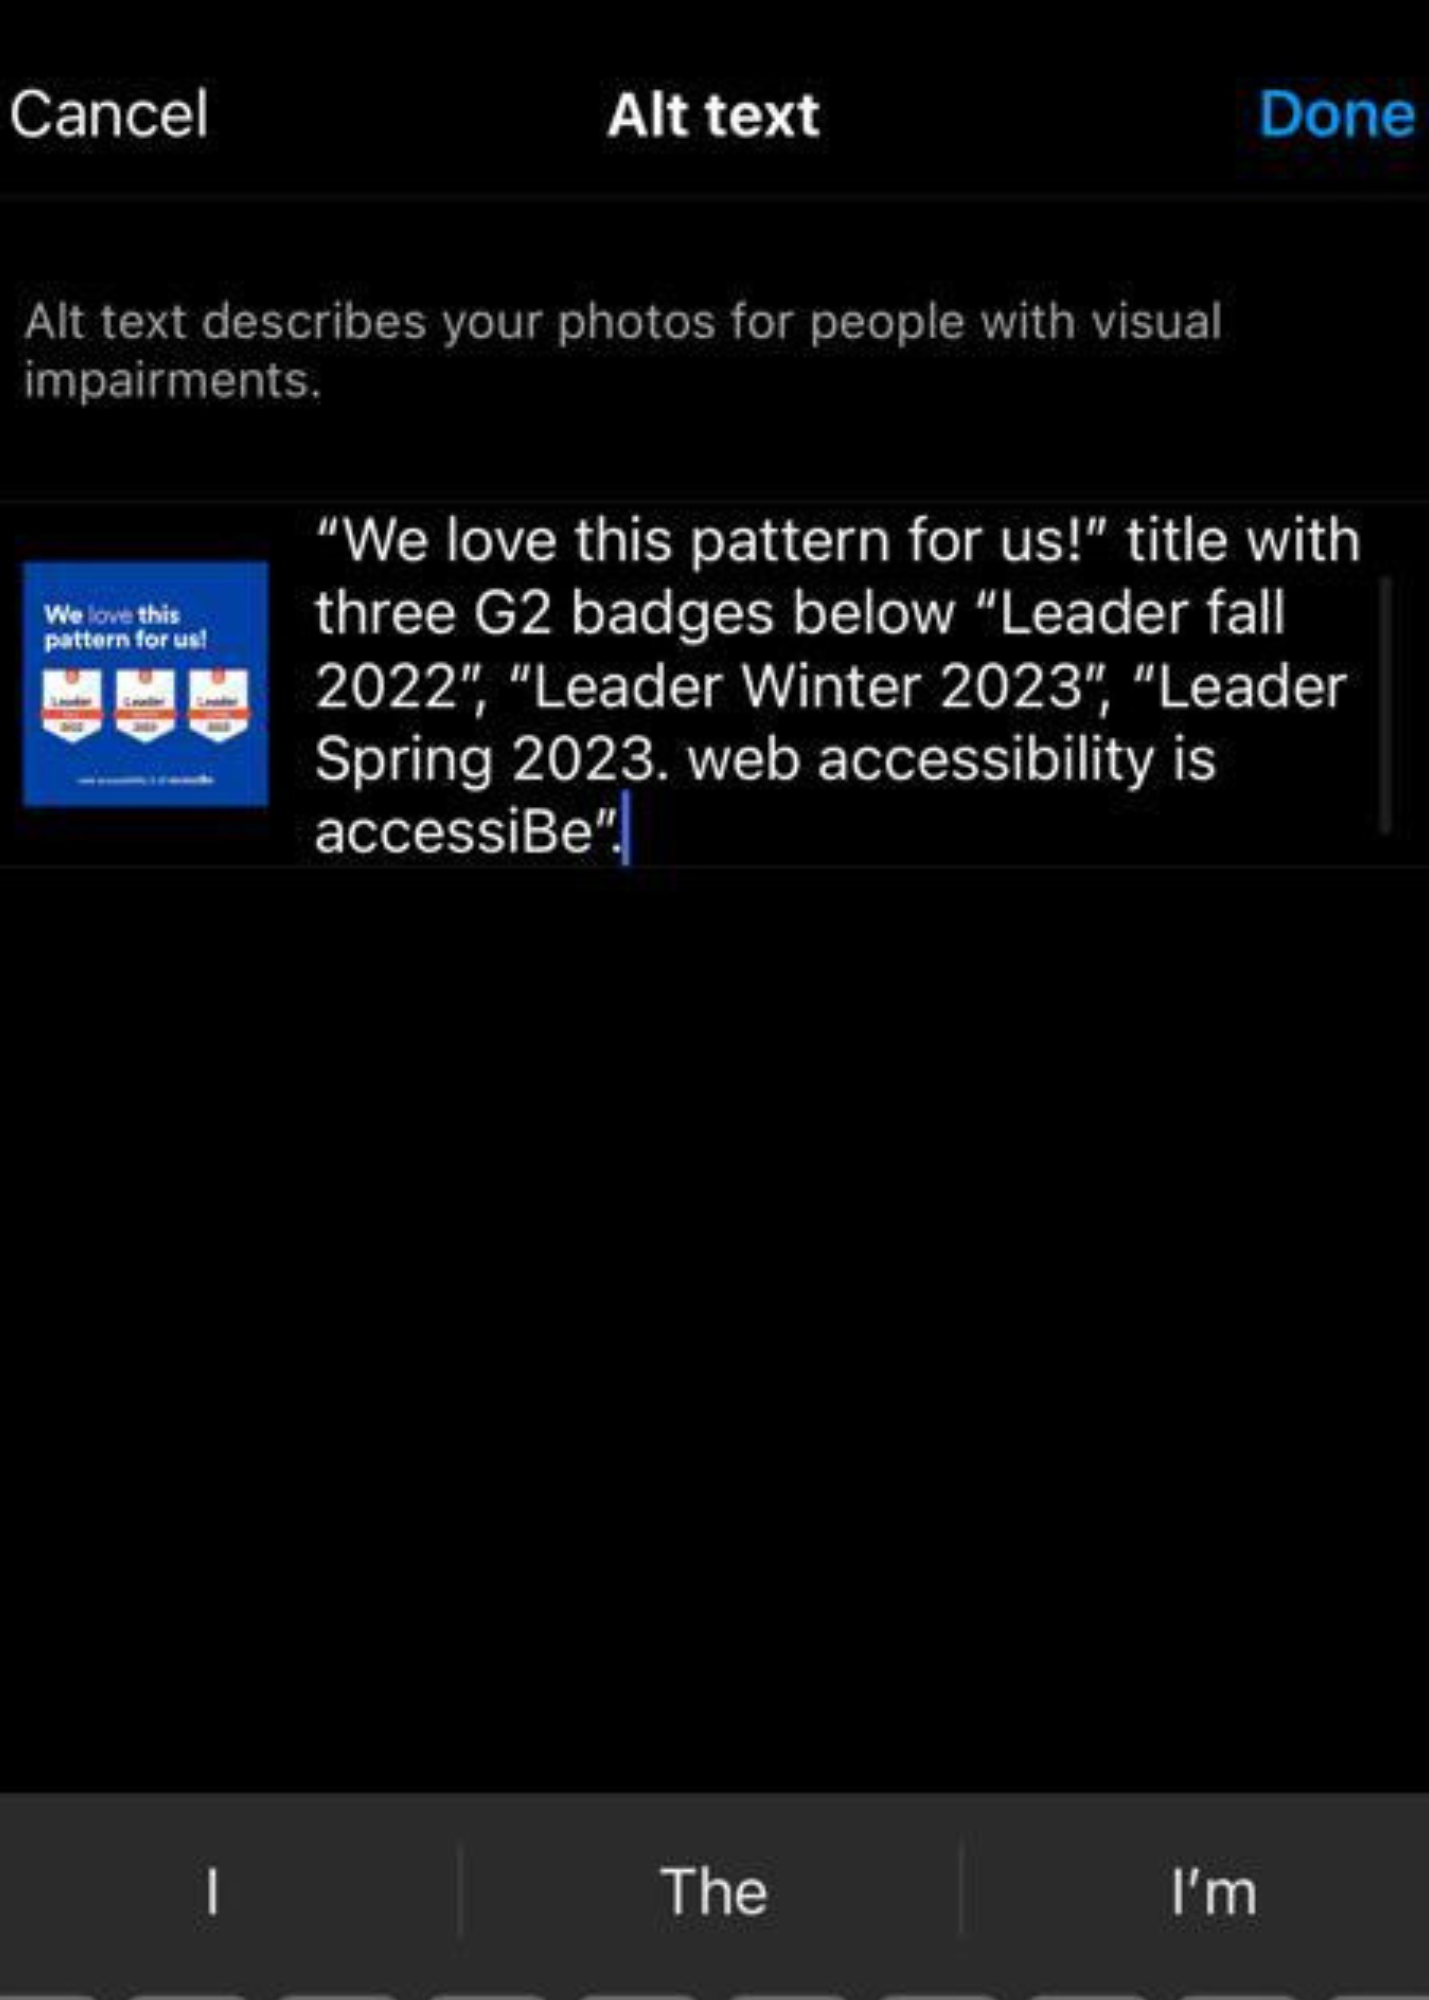 Sceenshot on an iPhone of the alternative text field within the Instagram platform